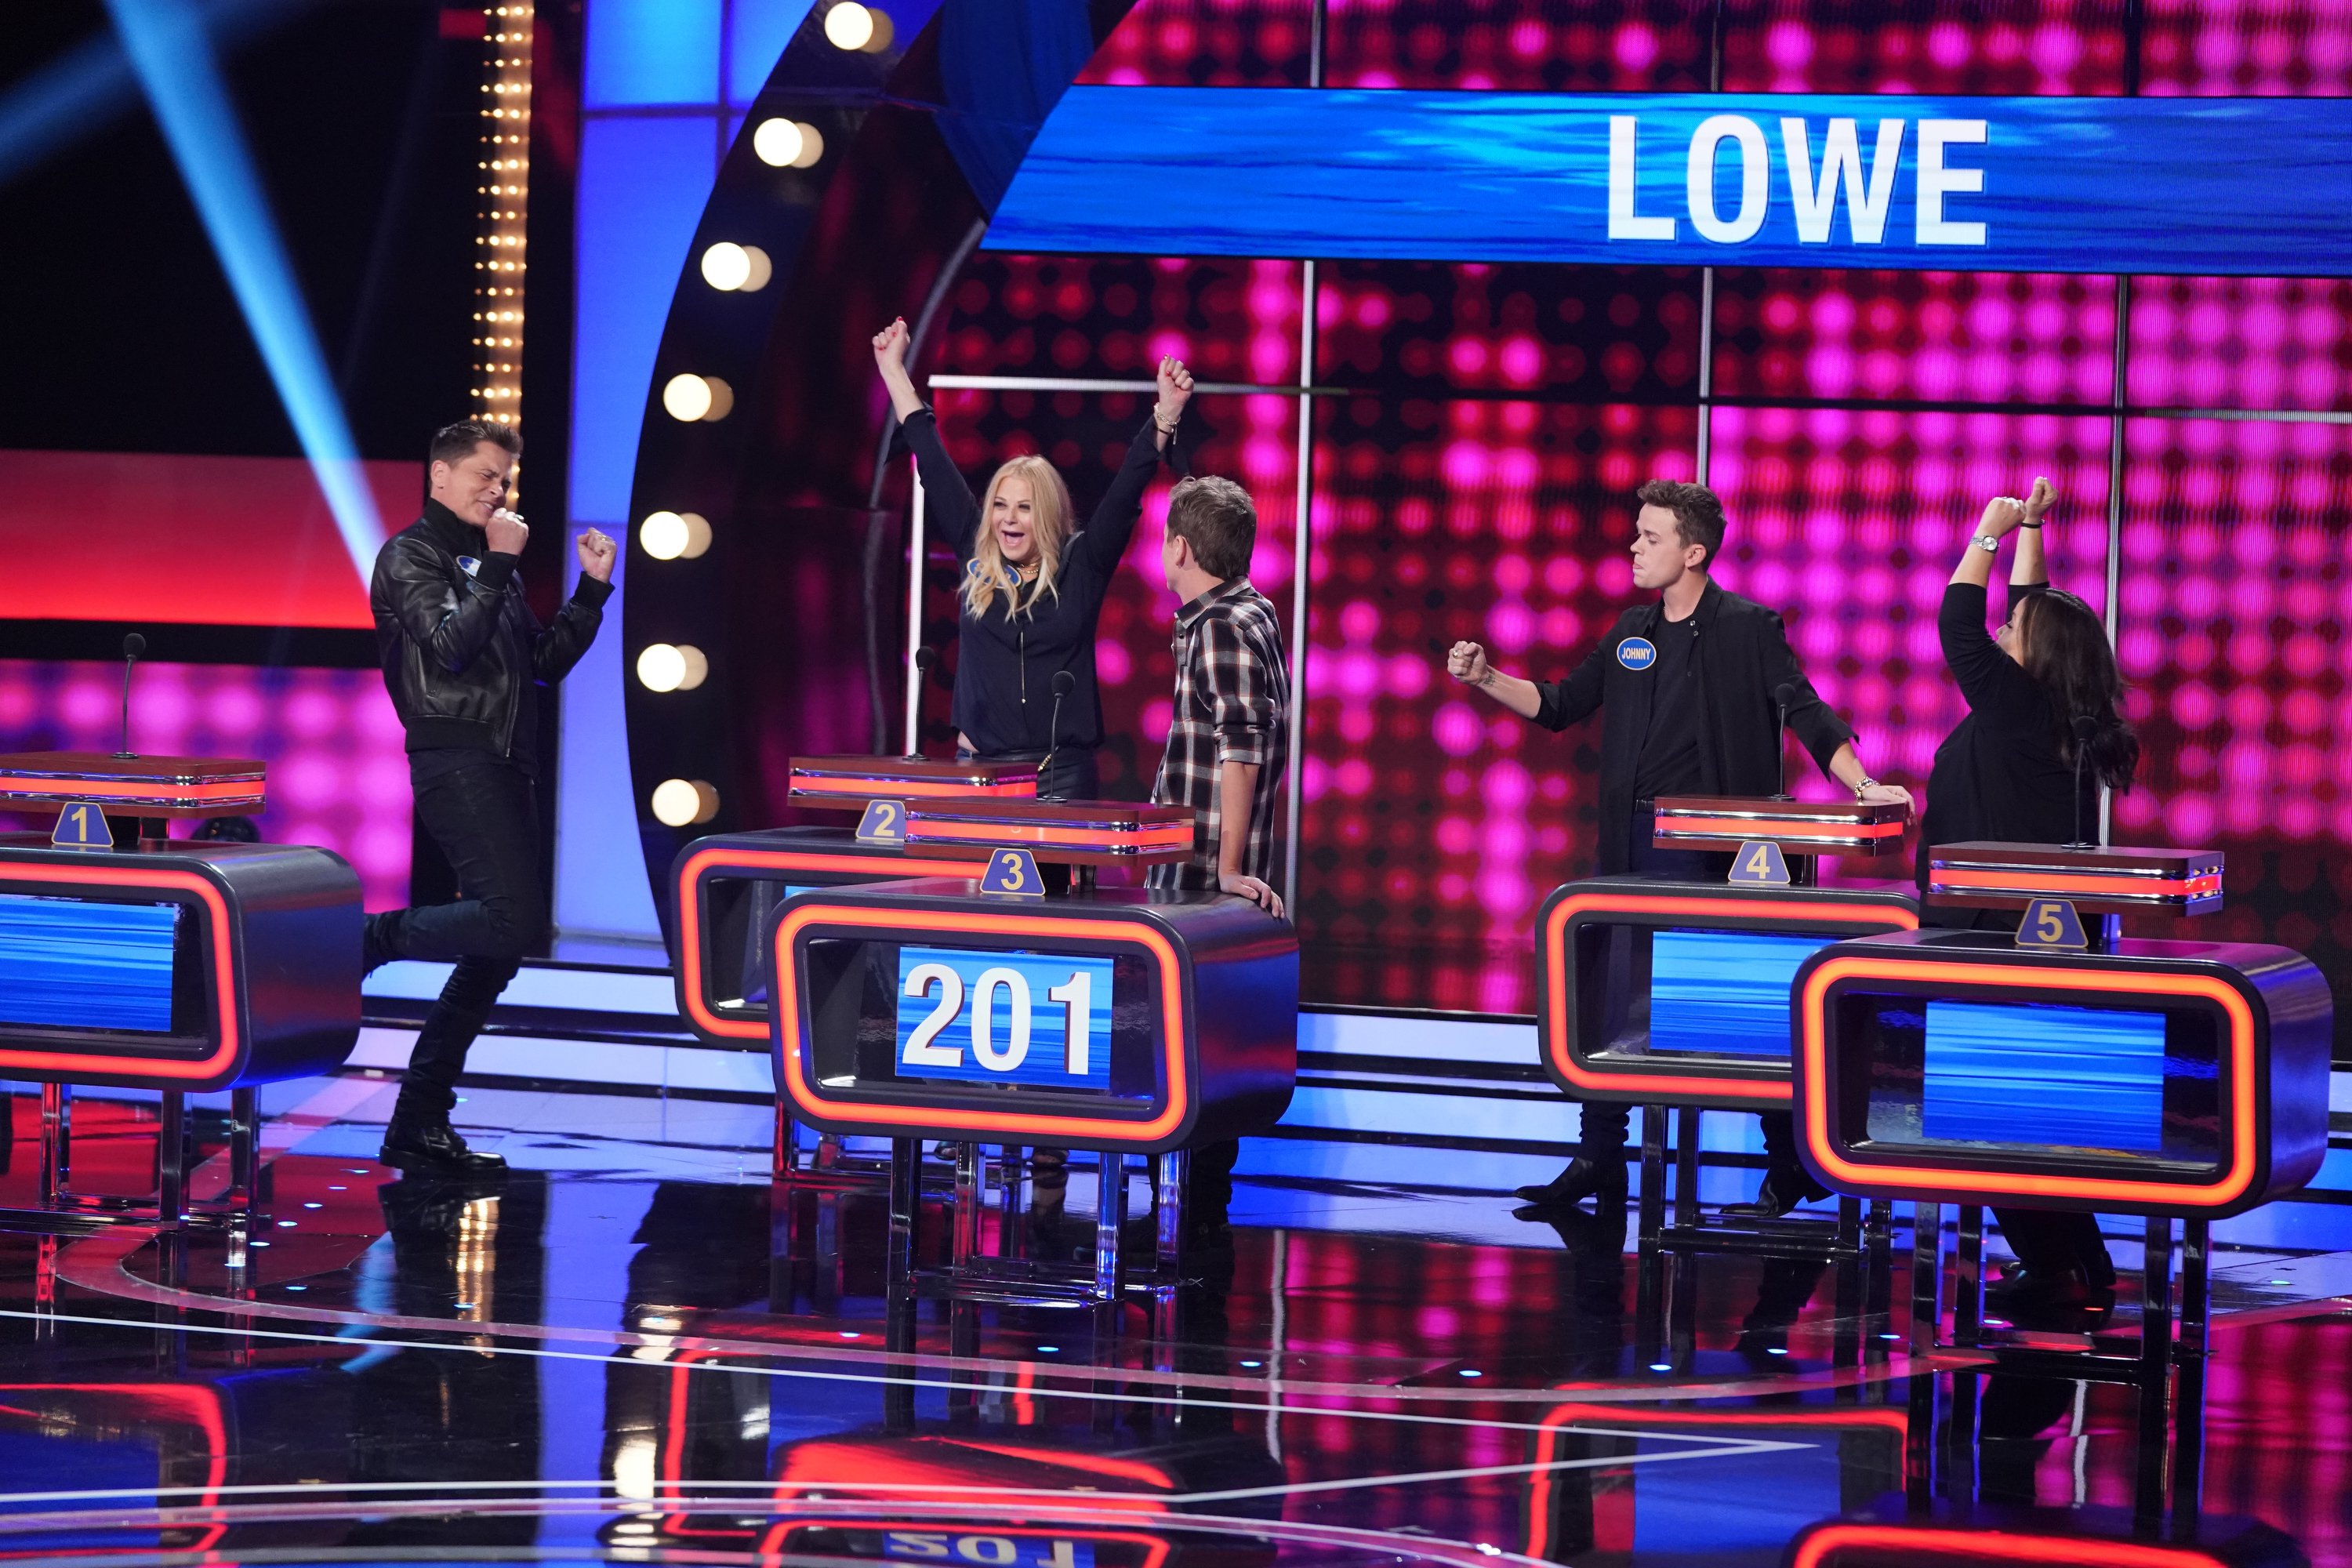 Berkoff, Lowe and family in the hilarious season 7 premiere episode of Family Feud on ABC. | Source: Getty Images